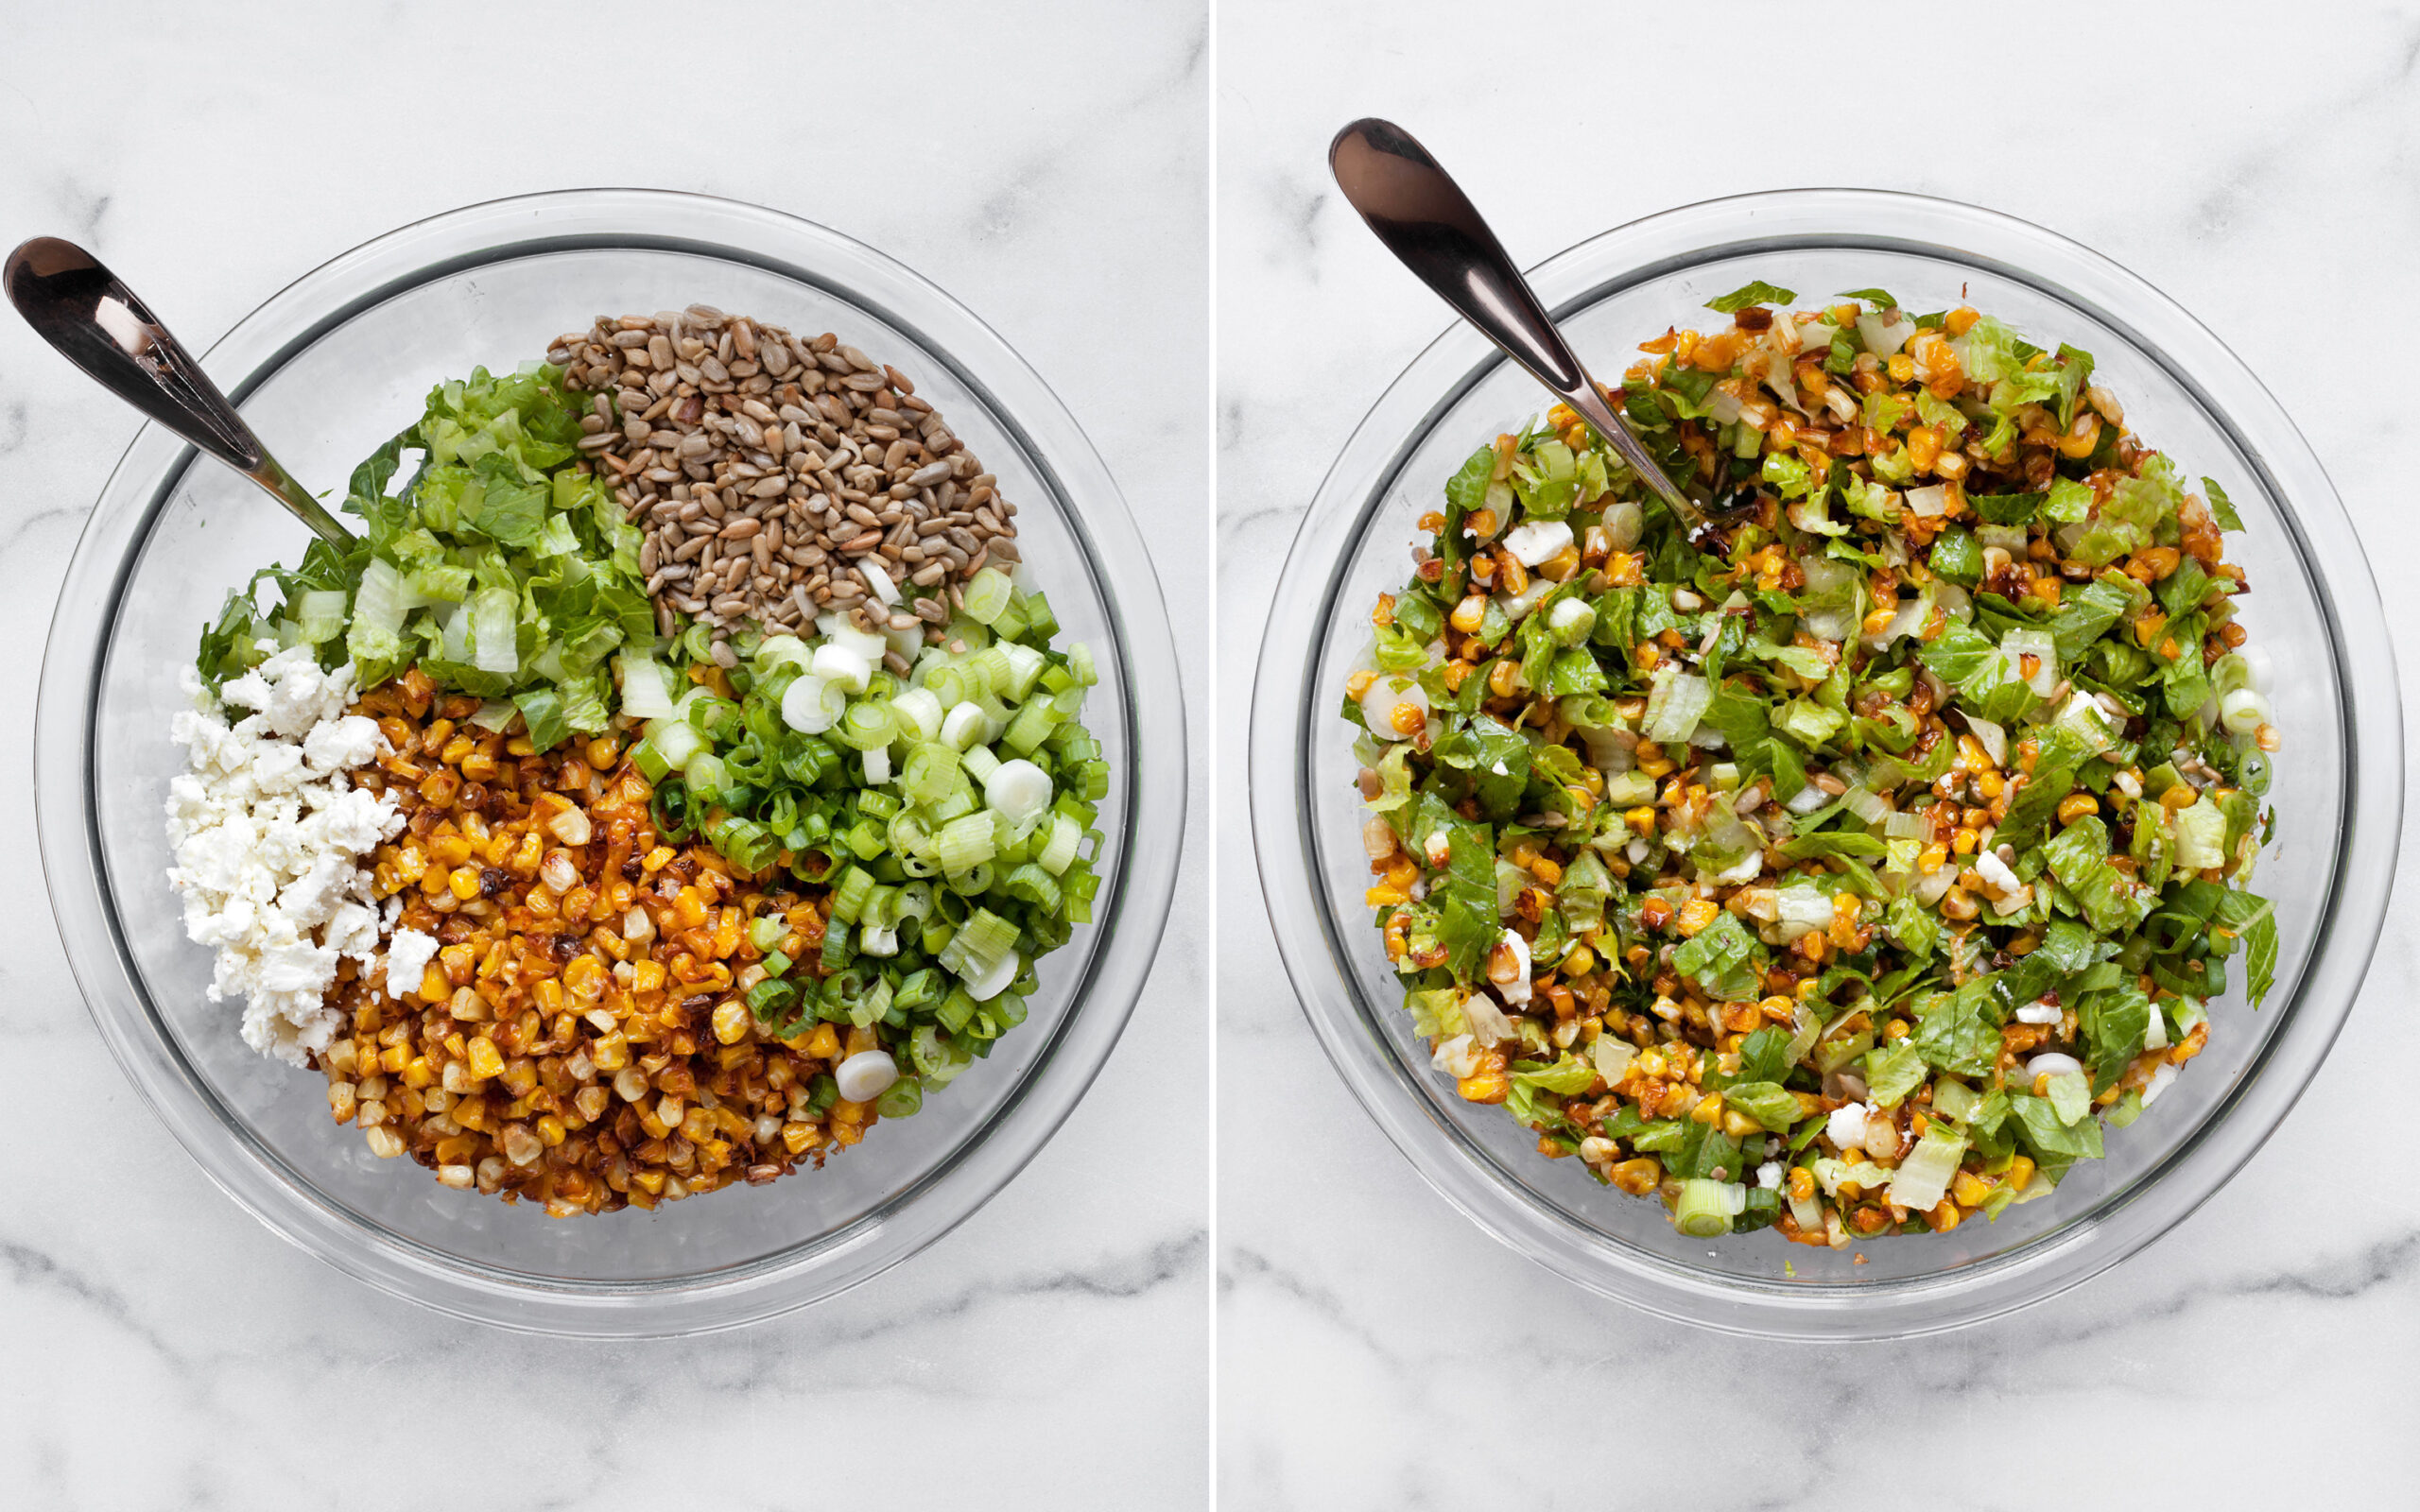 Combine the roasted corn, romaine, sesame seeds, feta and sunflower seeds. Then stir everything together with the vinaigrette.